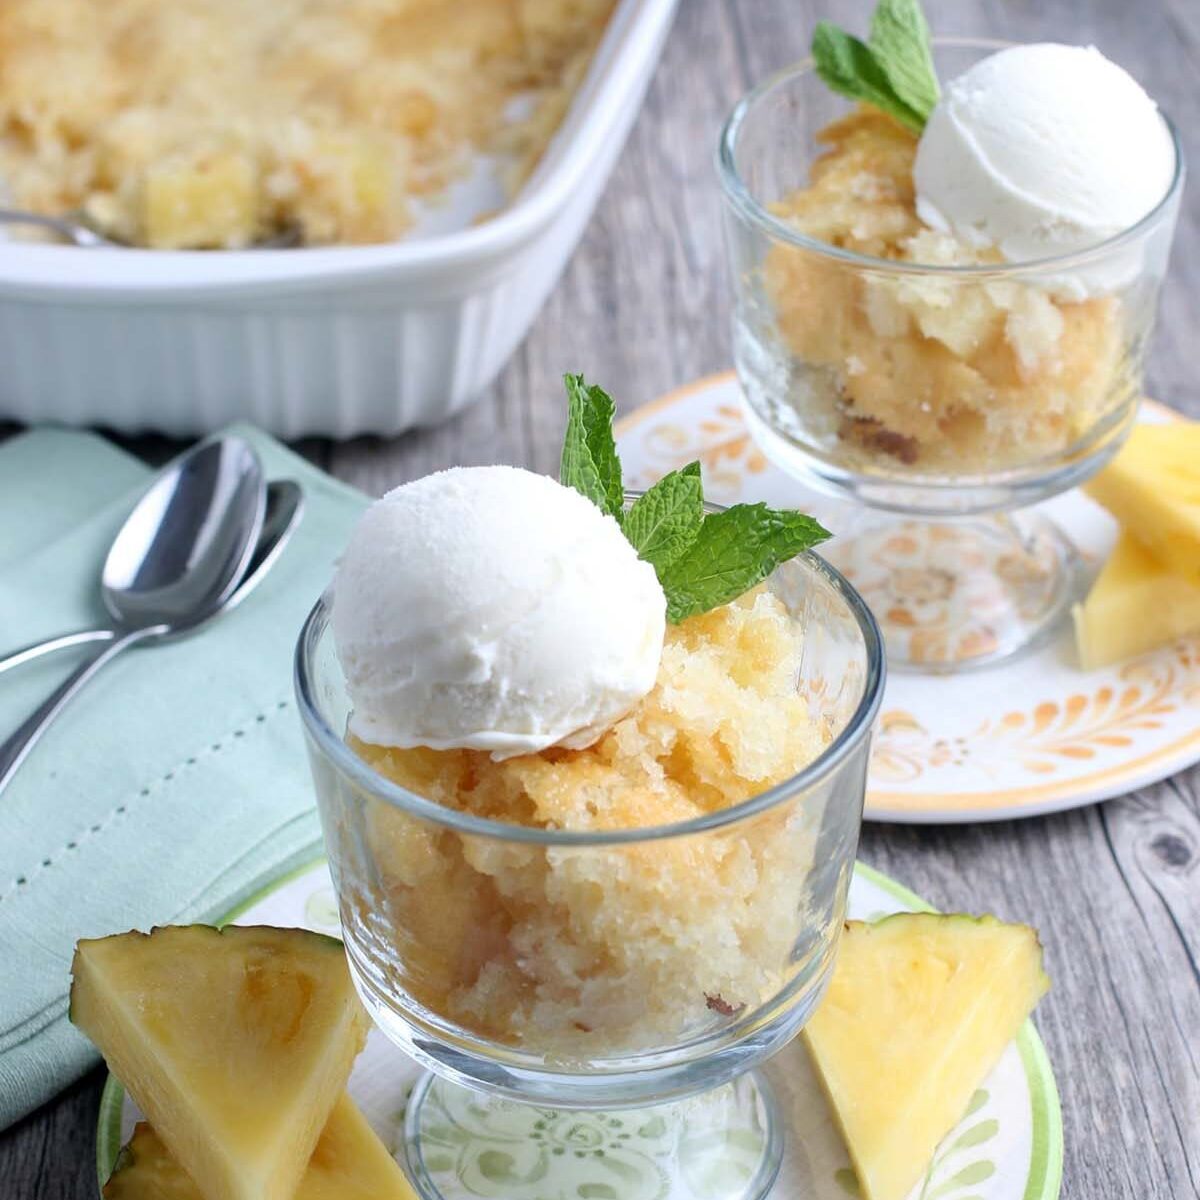 Pineapple Cobbler served up in small glass cups with a scoop of ice cream.